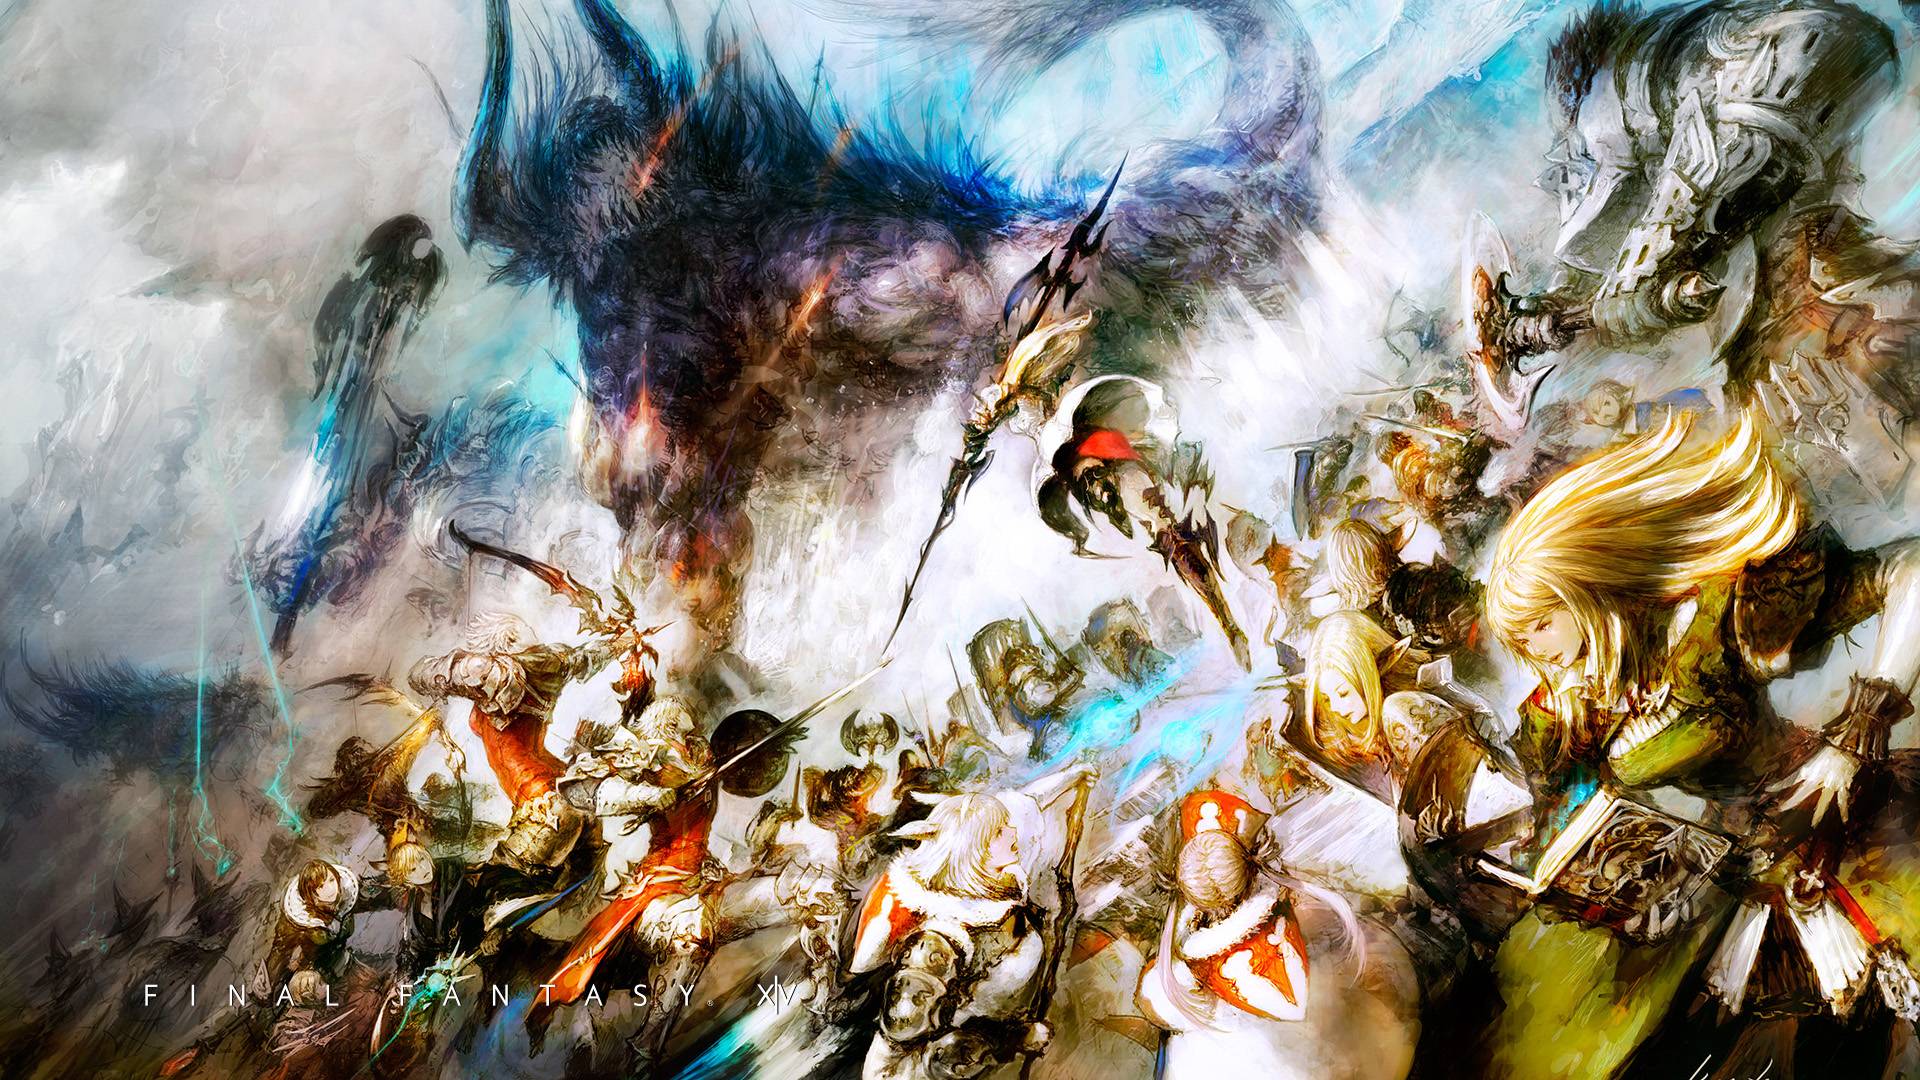 Free Download Final Fantasy Xiv Wallpapers 1920x1080 For Your